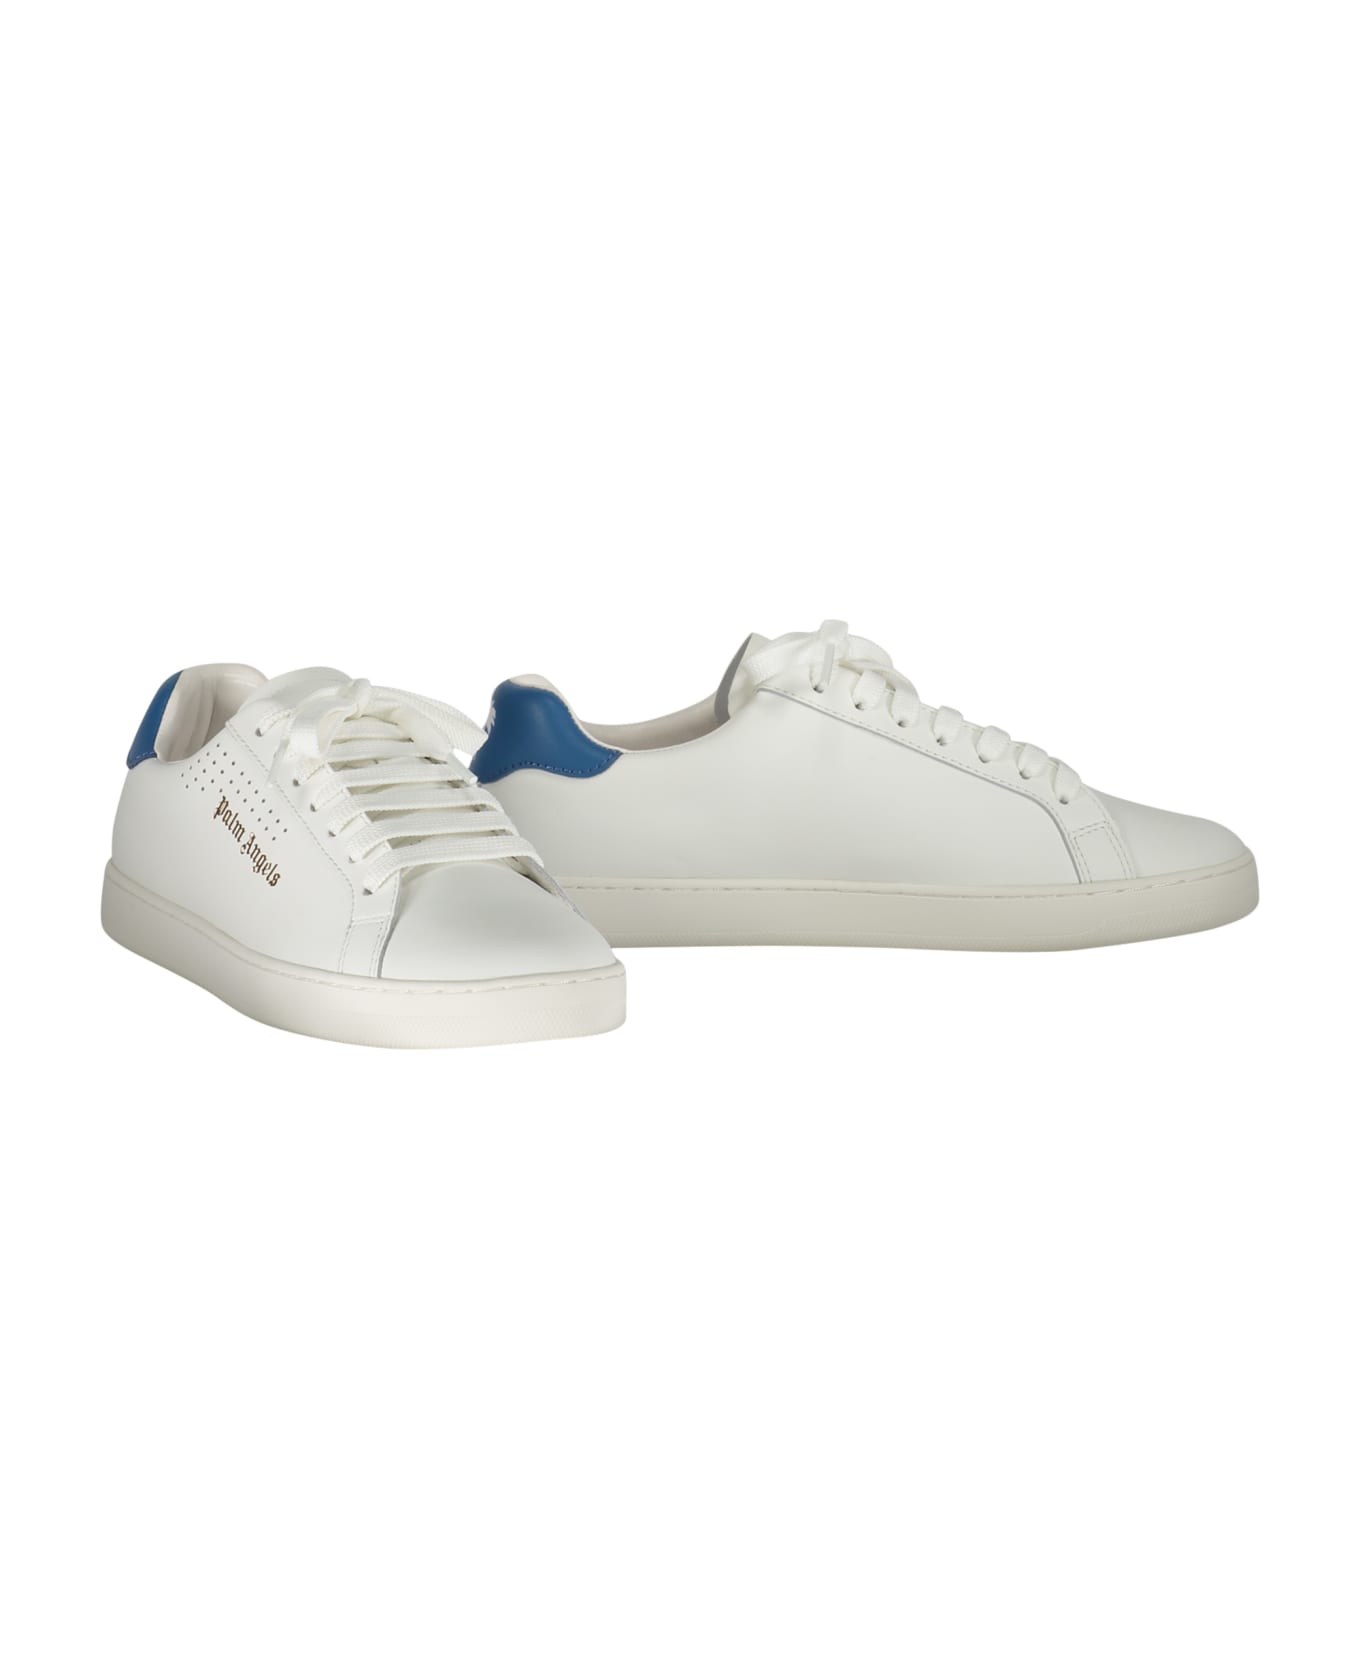 Palm Angels New Tennis Leather Sneakers - White